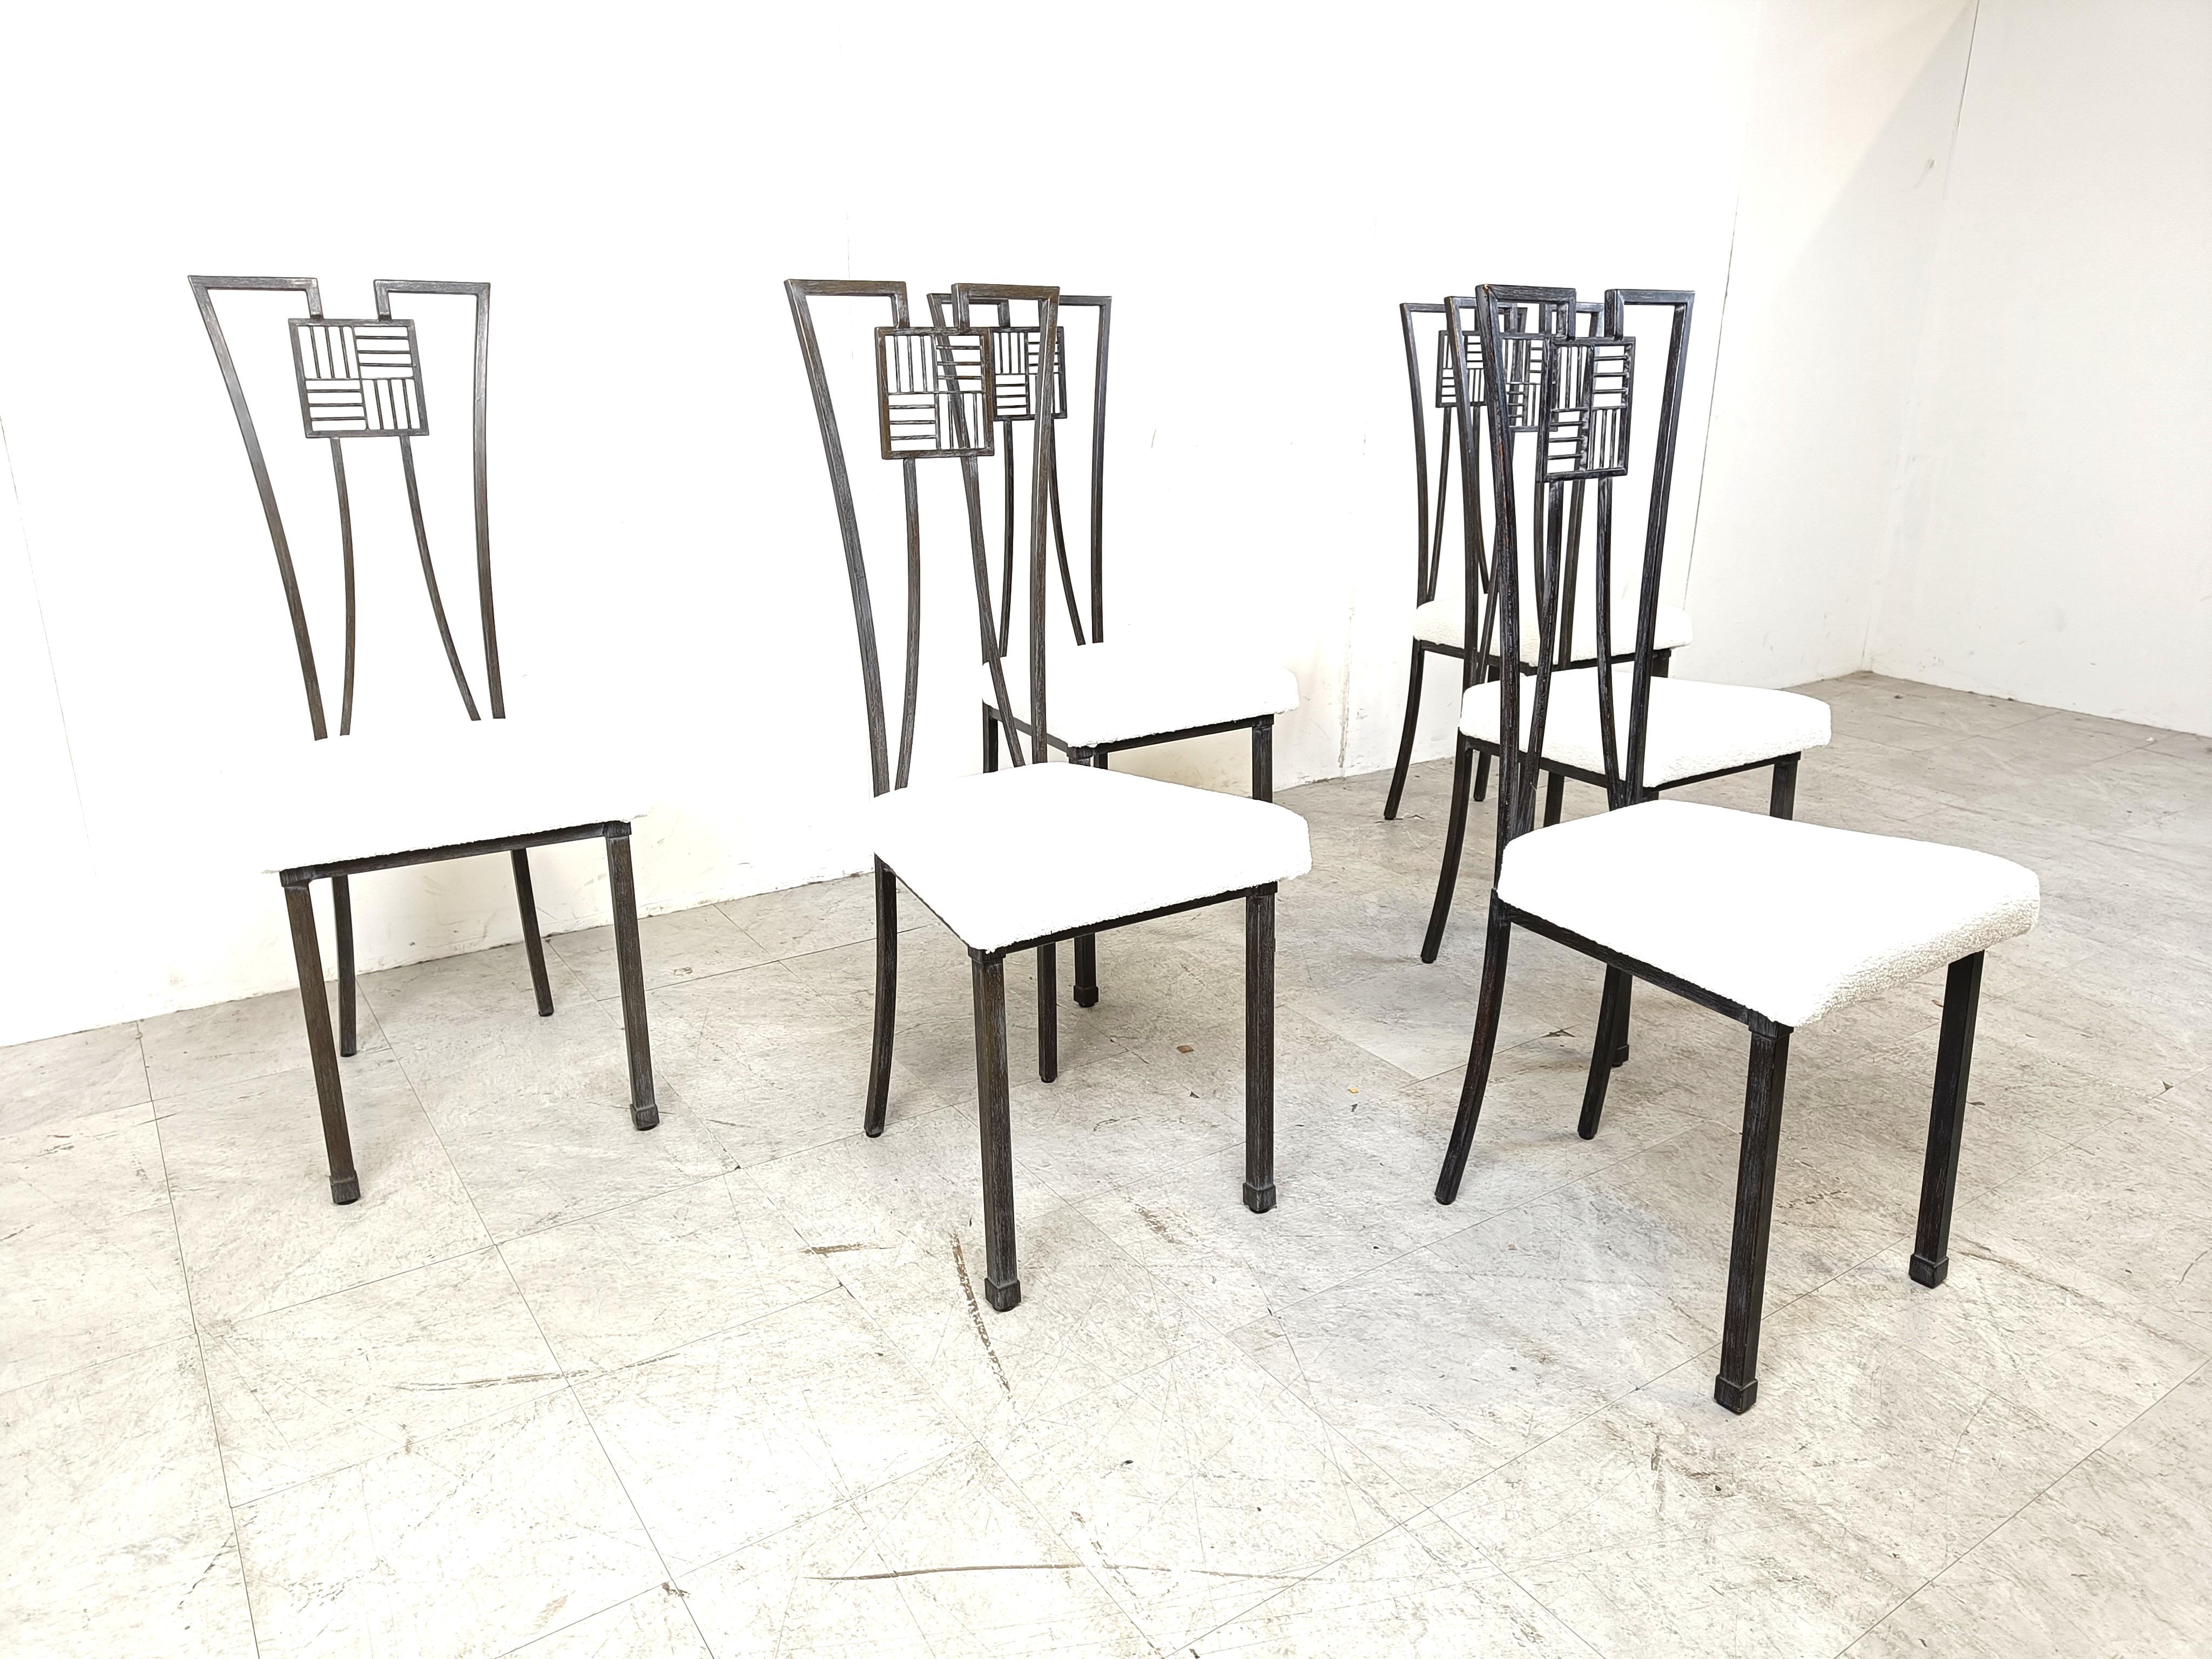 Late 20th Century Highback metal dining chairs, 1980s - set of 6 For Sale